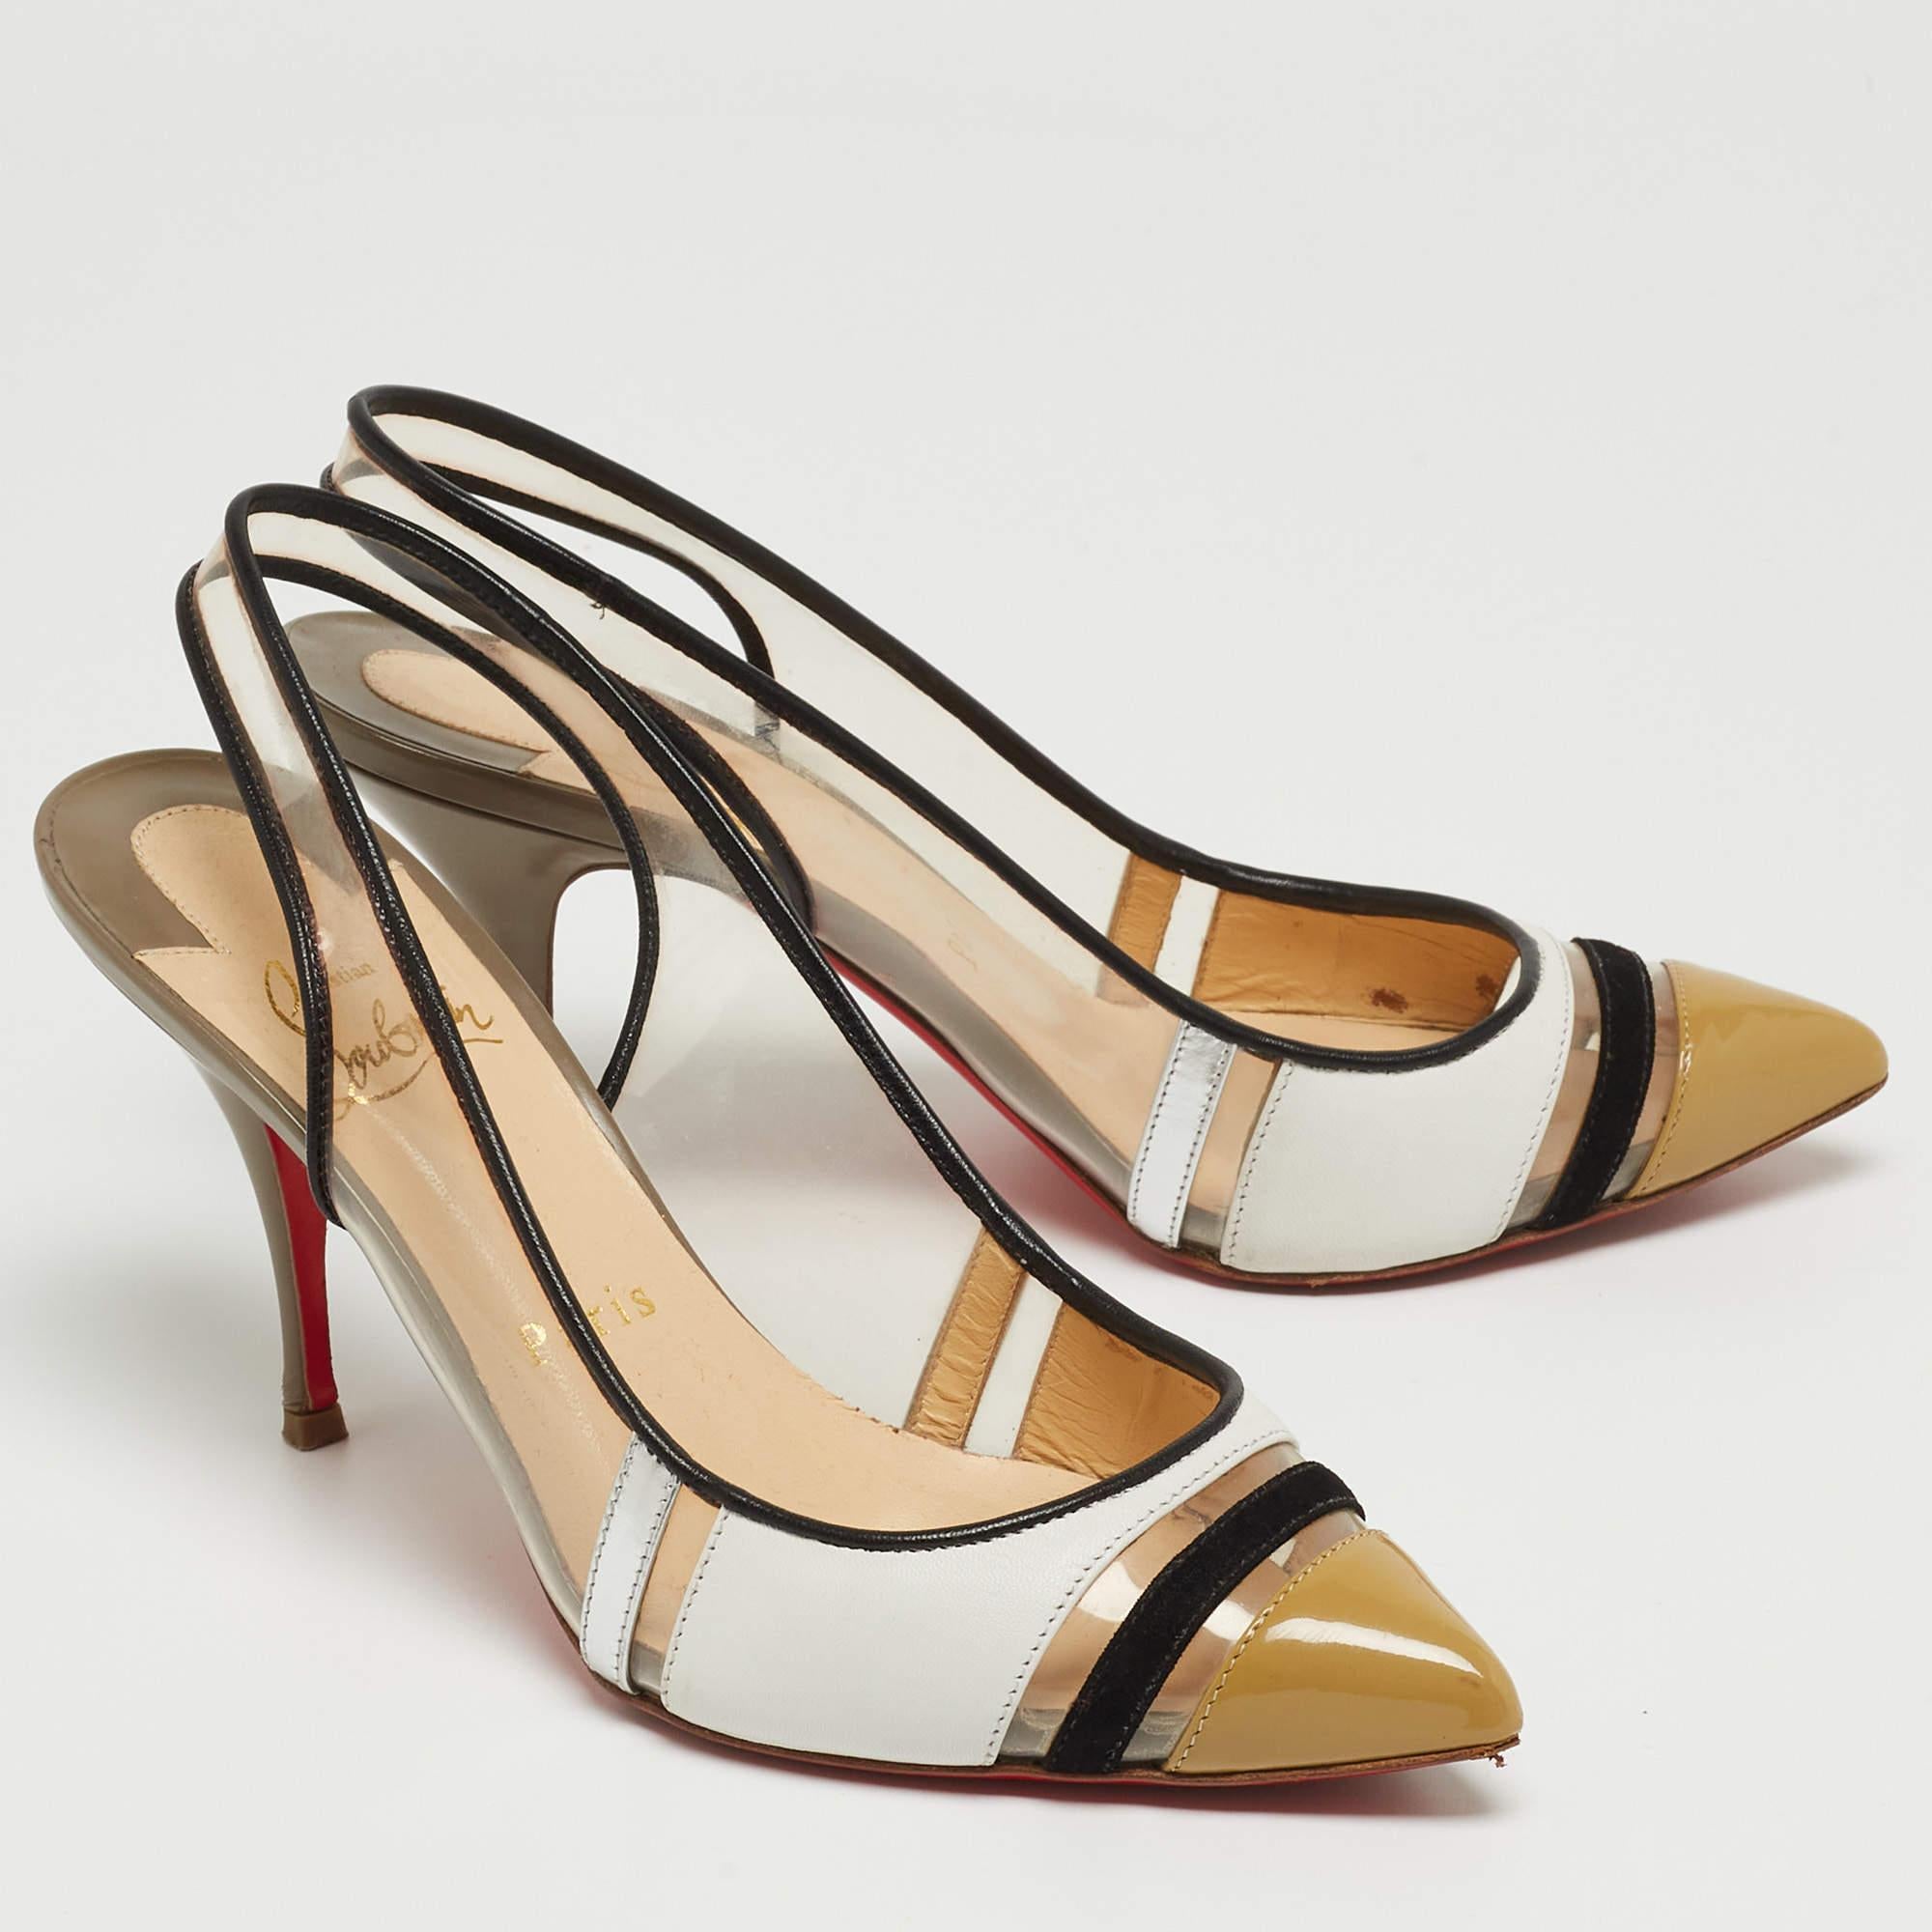 Women's Christian Louboutin Tri-Color PVC and Leather Highway Slingback Sandals Size 36. For Sale